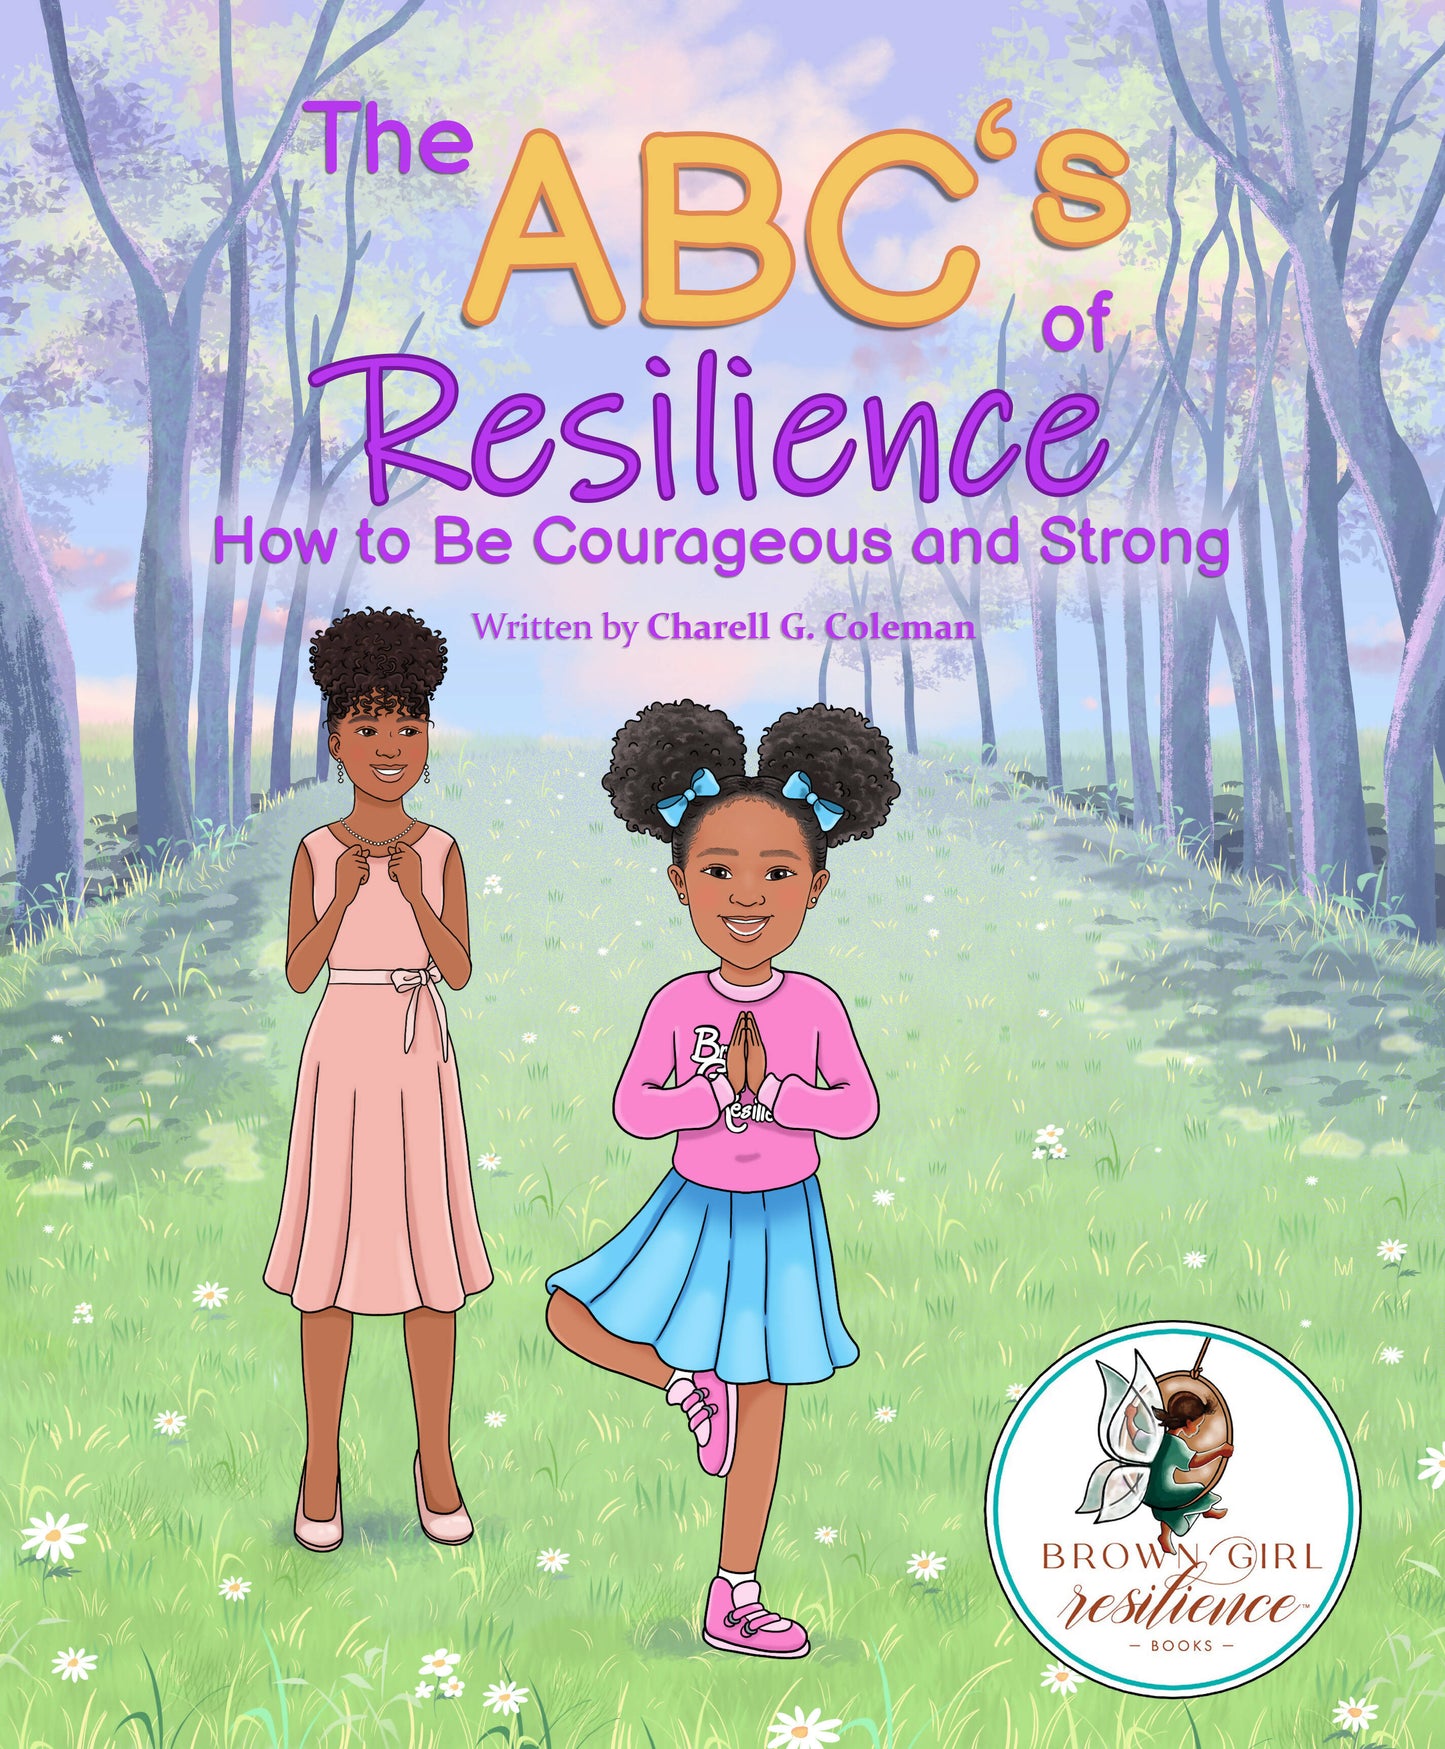 The ABC's of Resilience: How to Be Courageous and Strong (PAPERBACK)